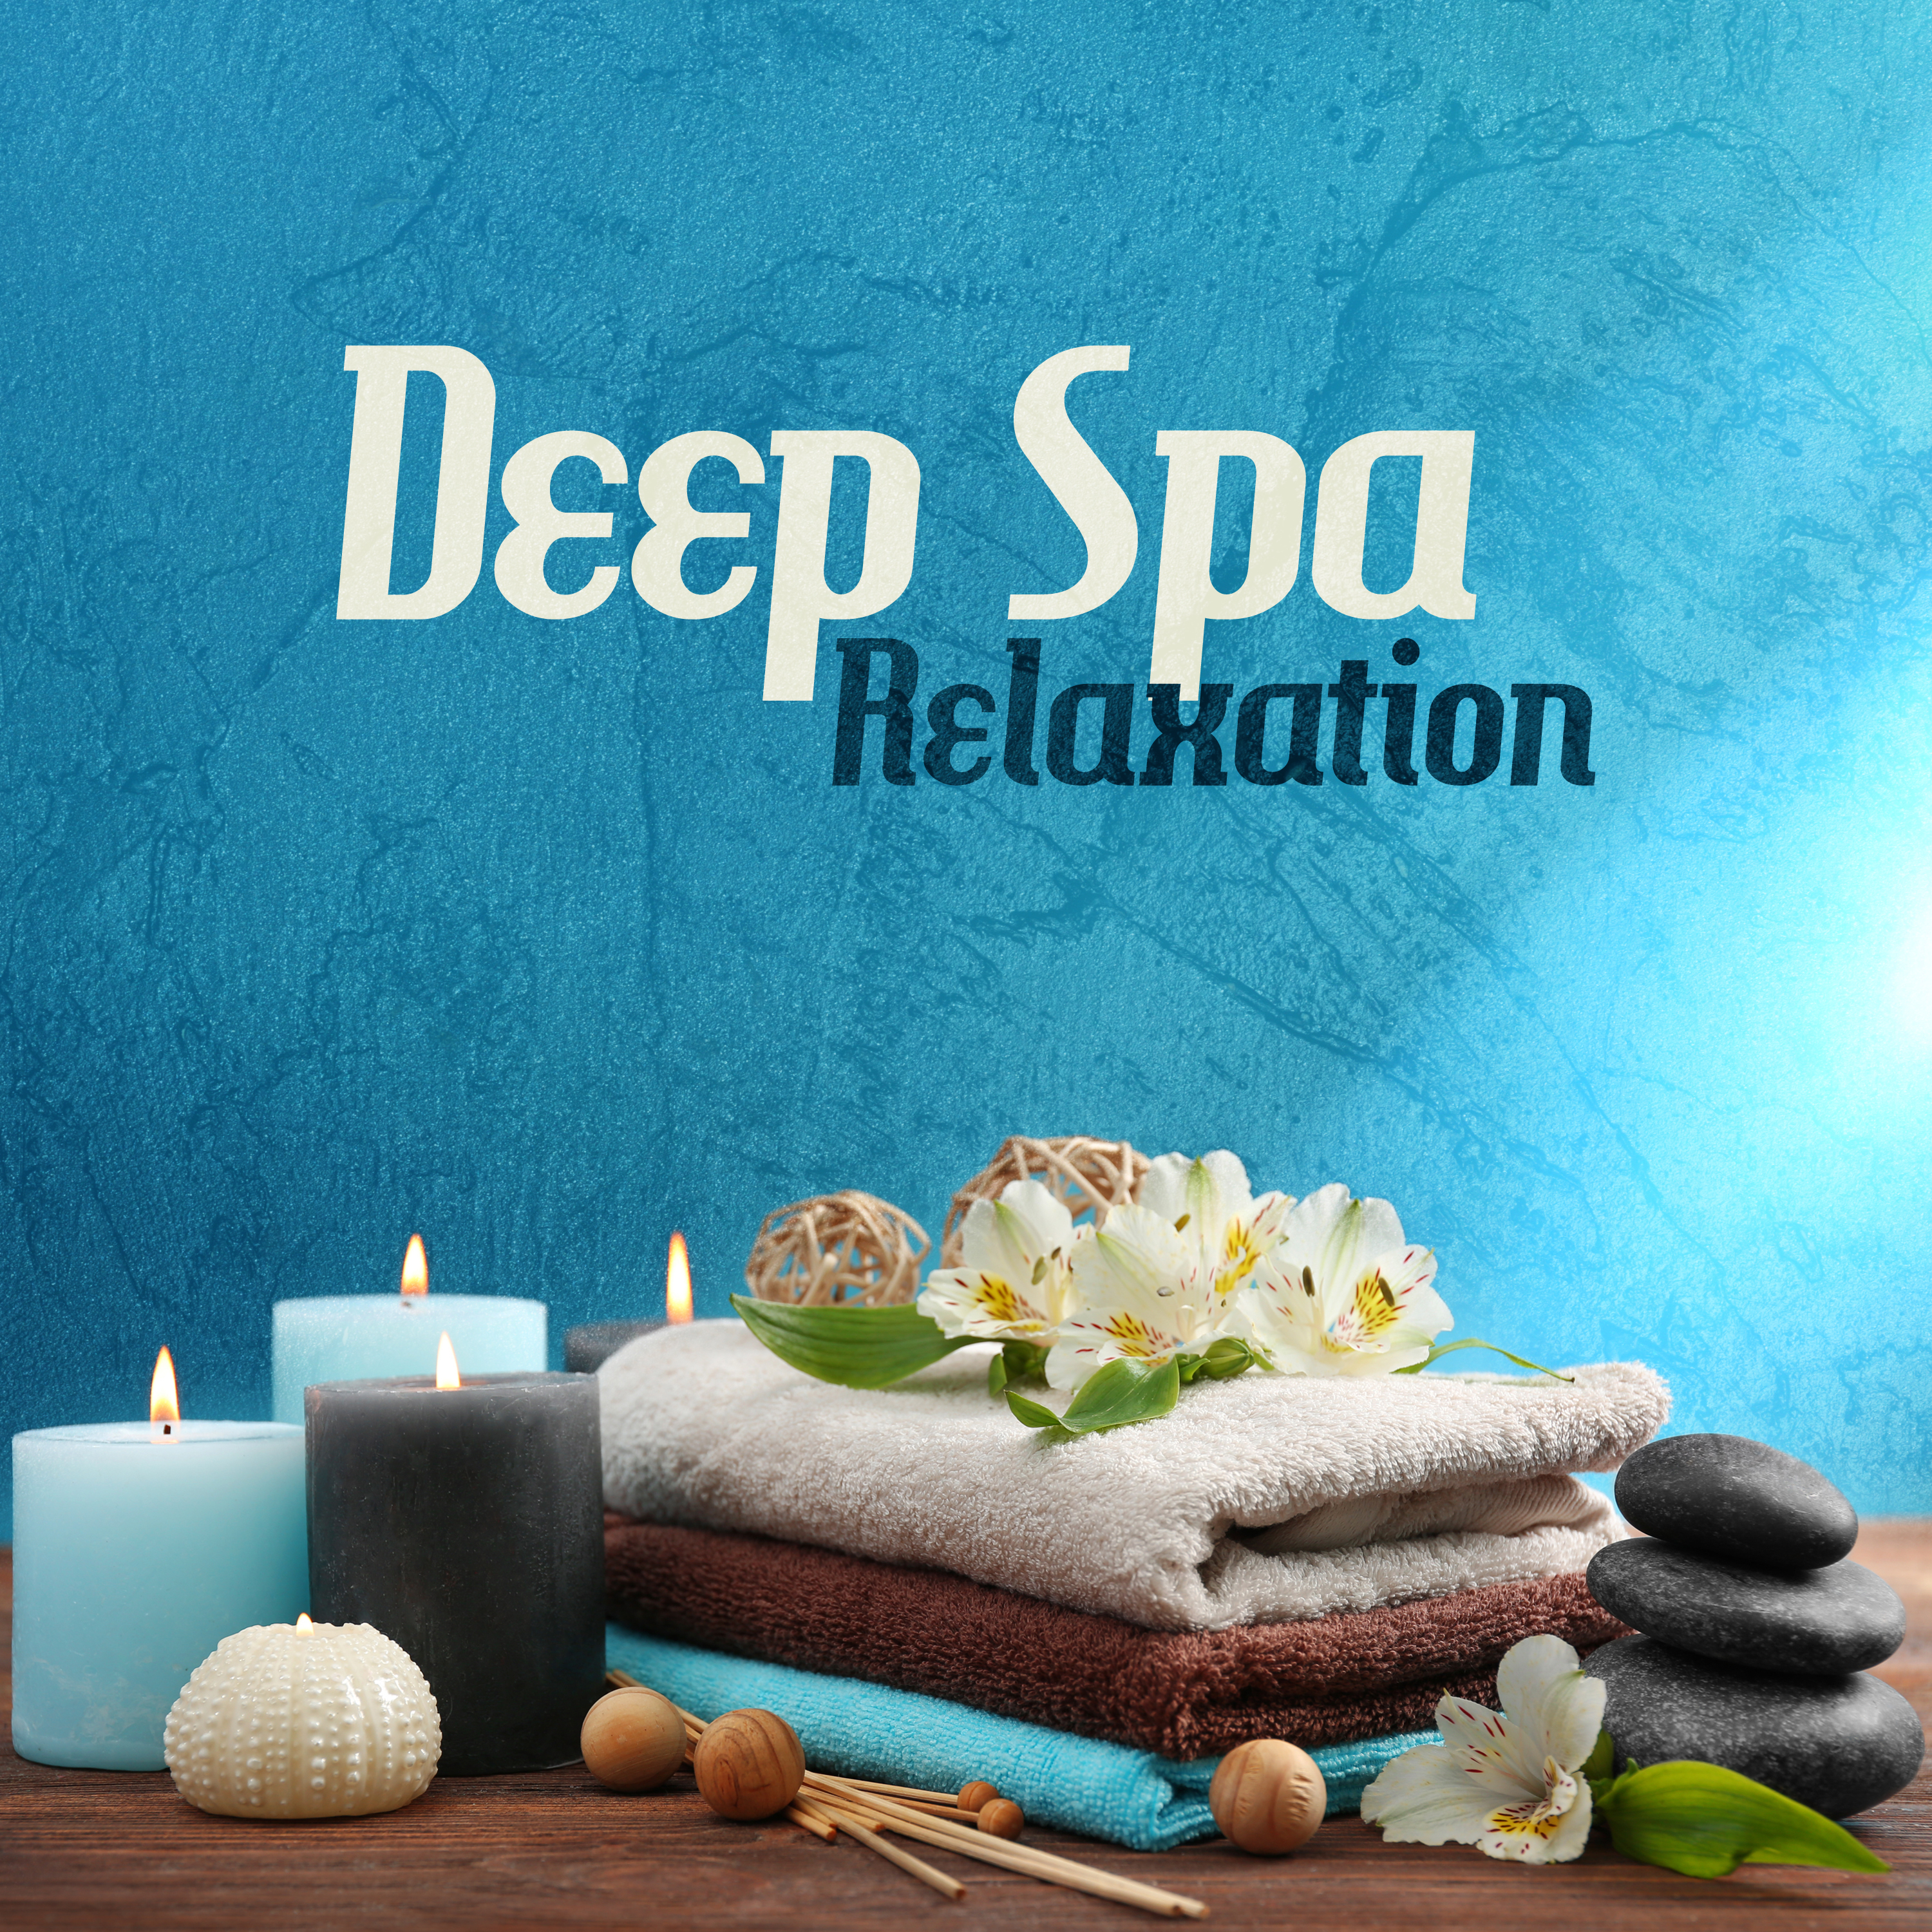 Deep Spa Relaxation